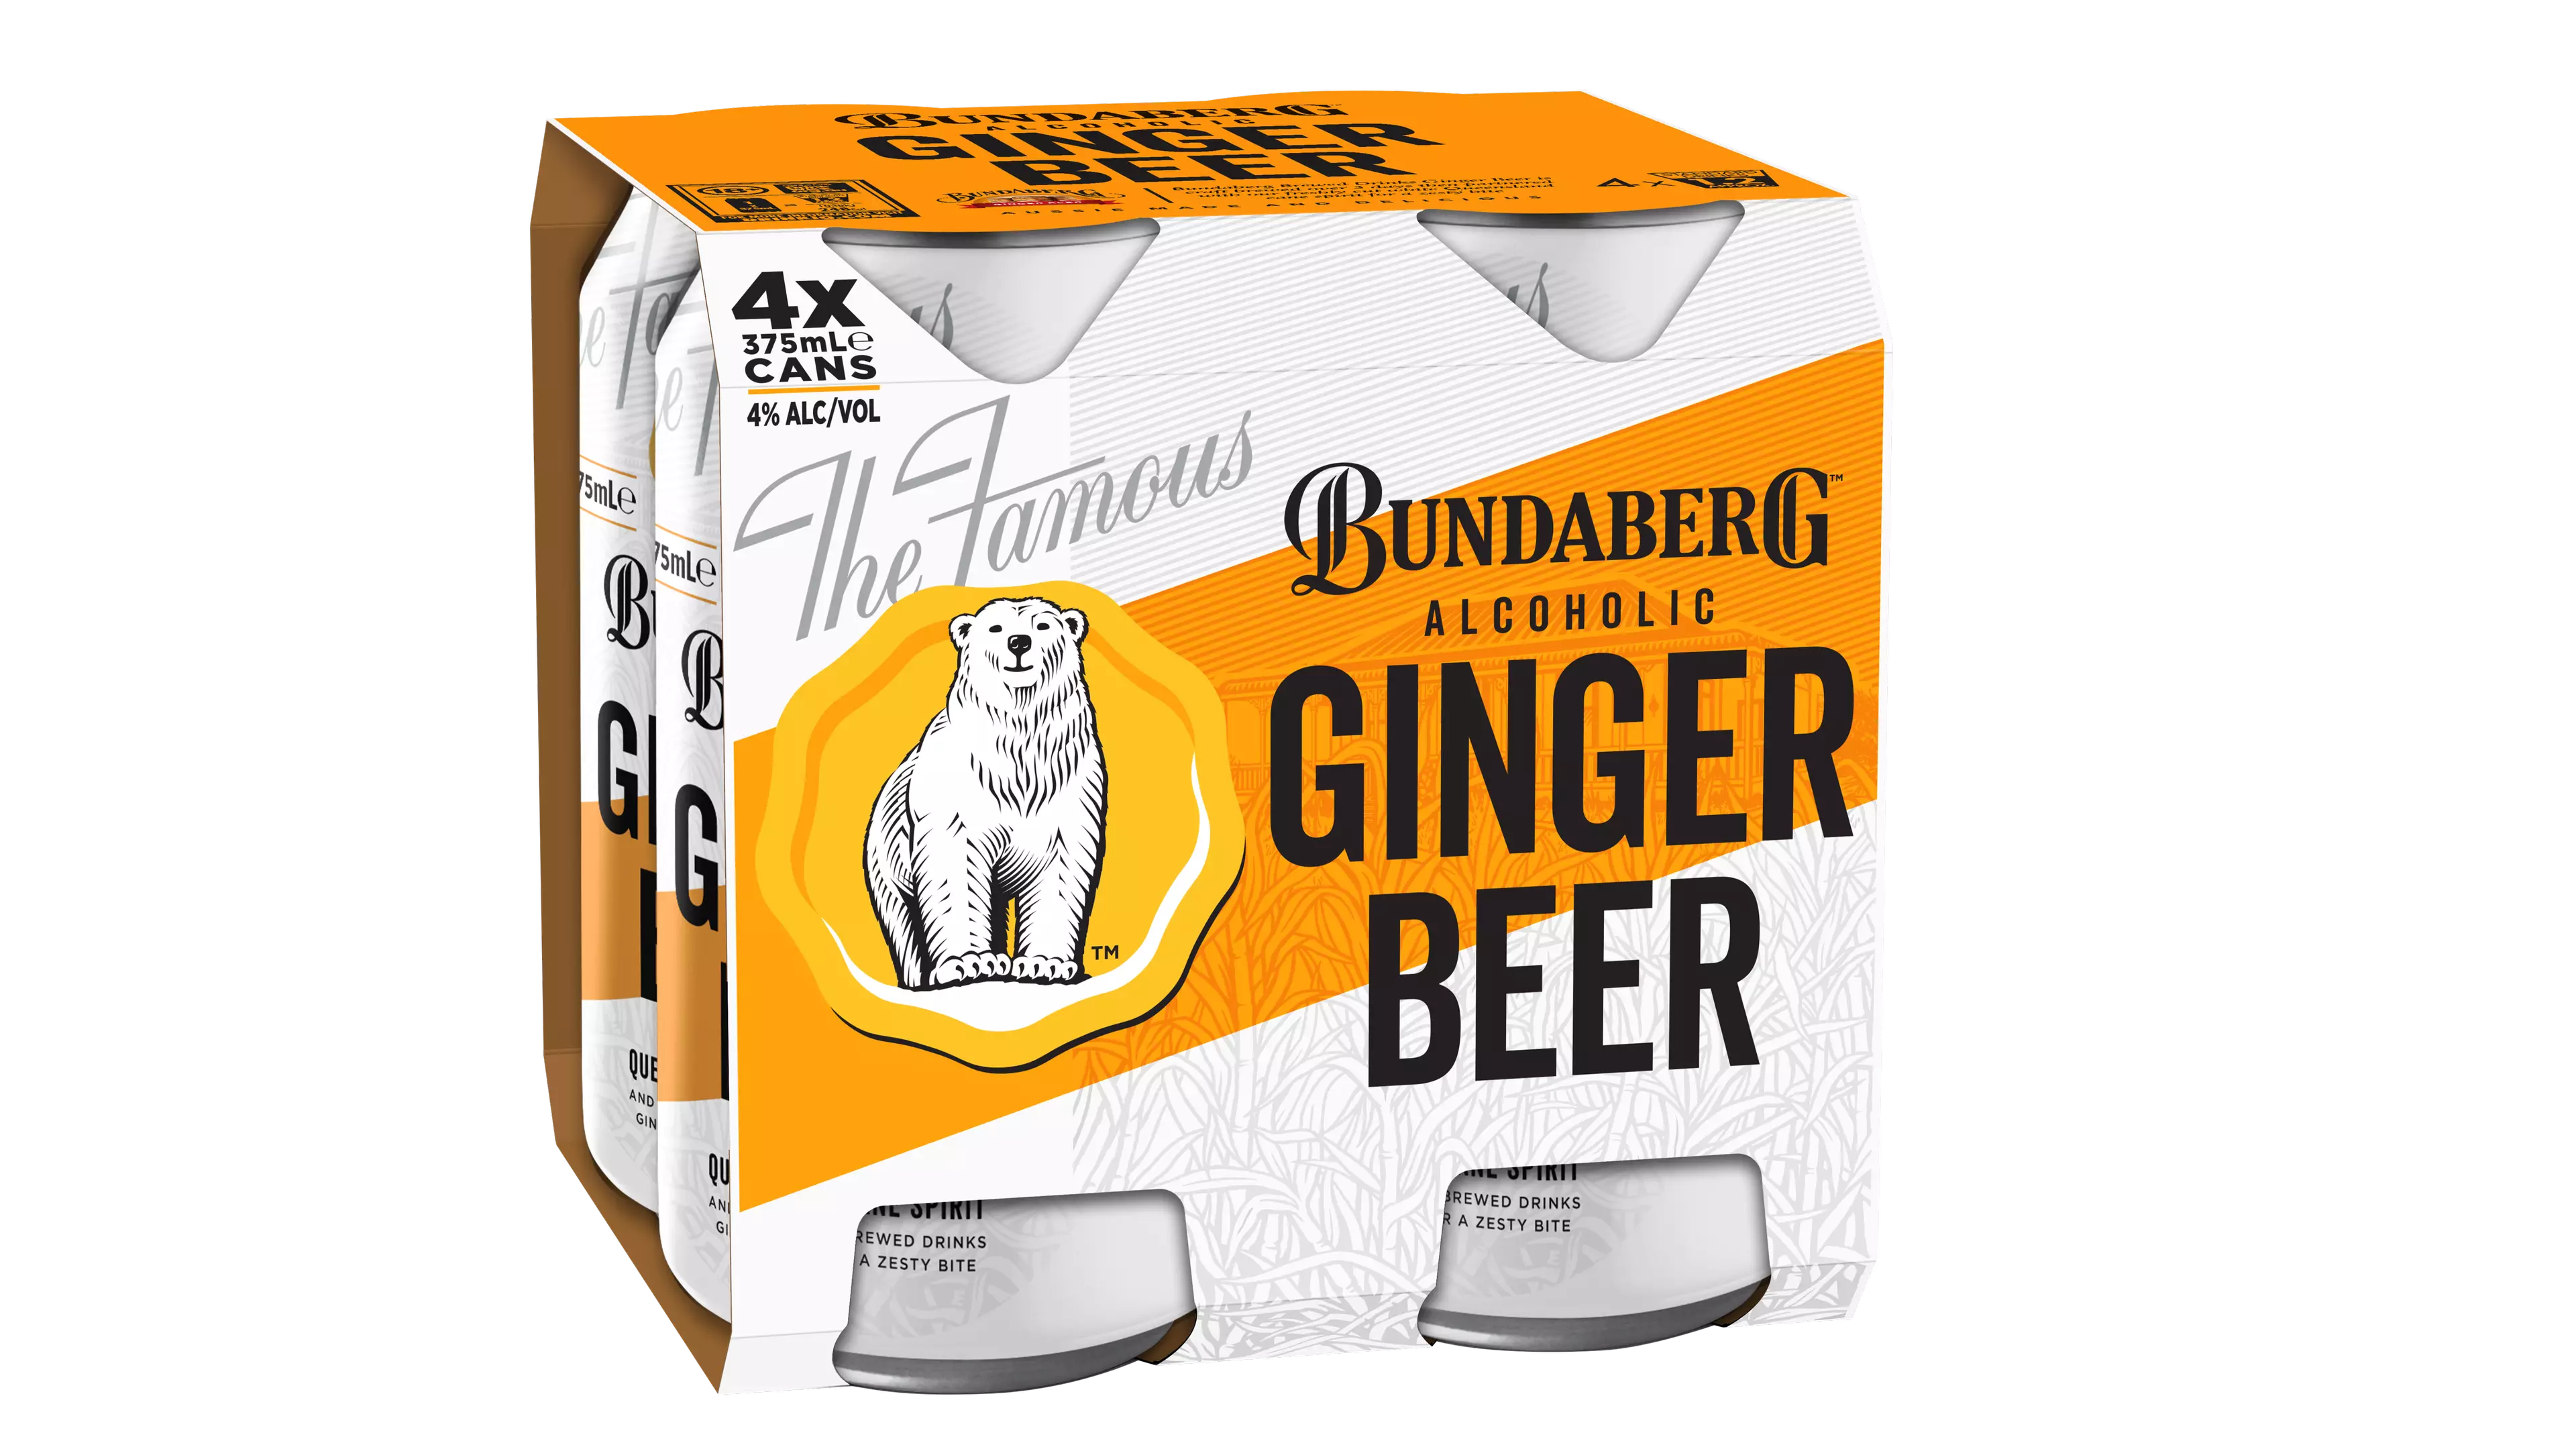 Bundaberg Is Finally Doing An Alcoholic Version Of Their Iconic Ginger Beer